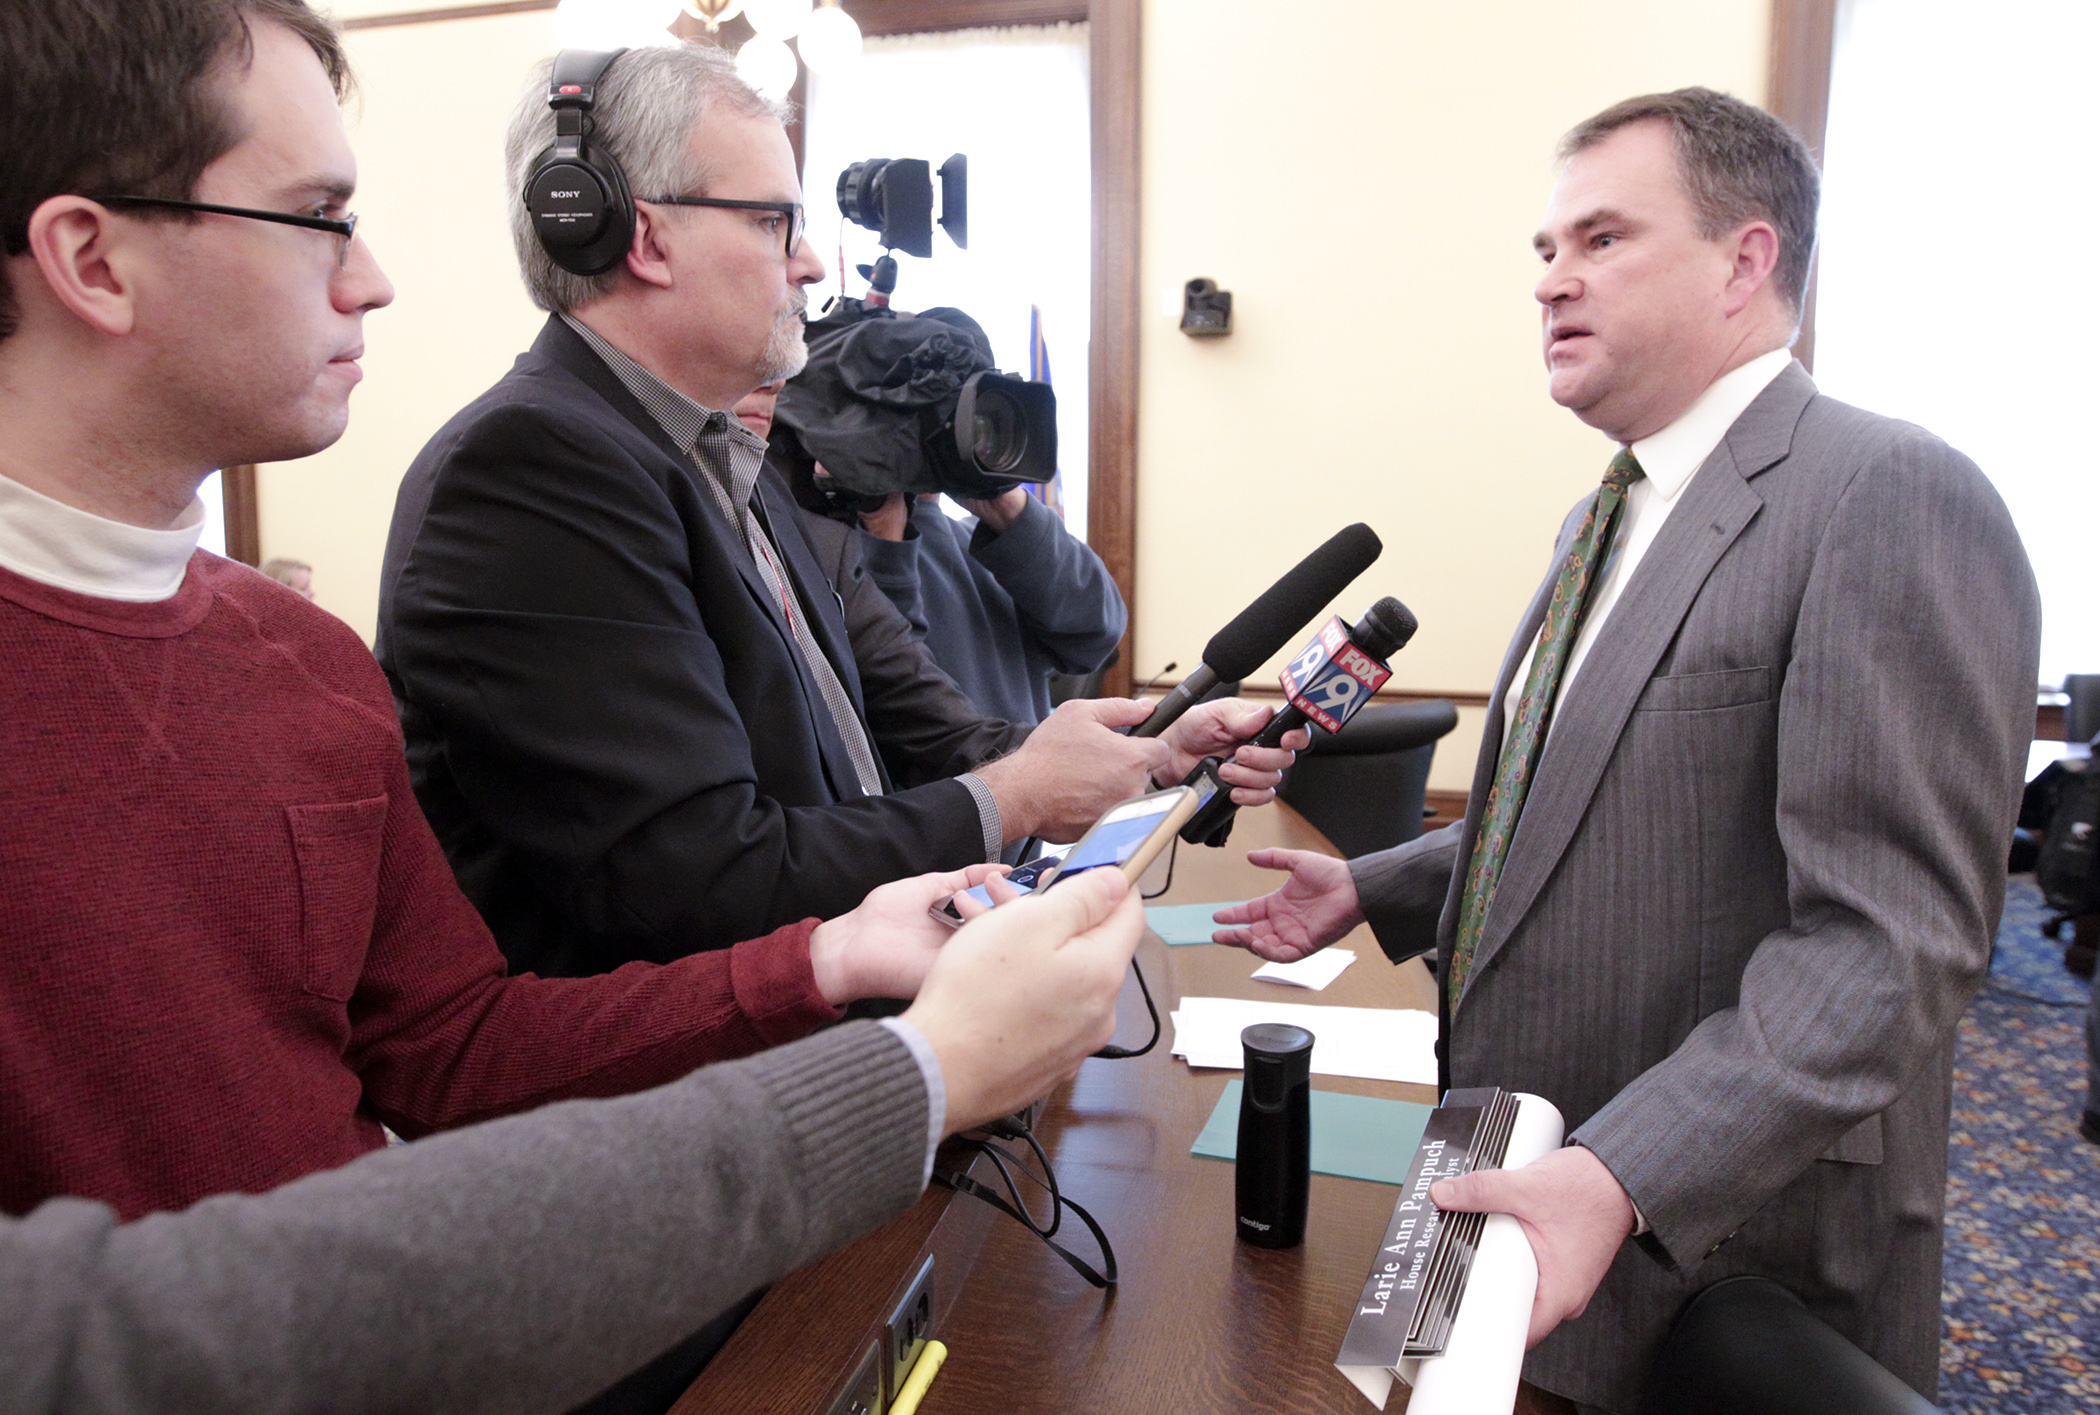 Rep. Joe Hoppe, co-chair of the conference committee on HF1/SF1*, talks with the media after members reached agreement Jan. 25 on the bill to aid consumers hit by increases in health care premiums. Photo by Paul Battaglia